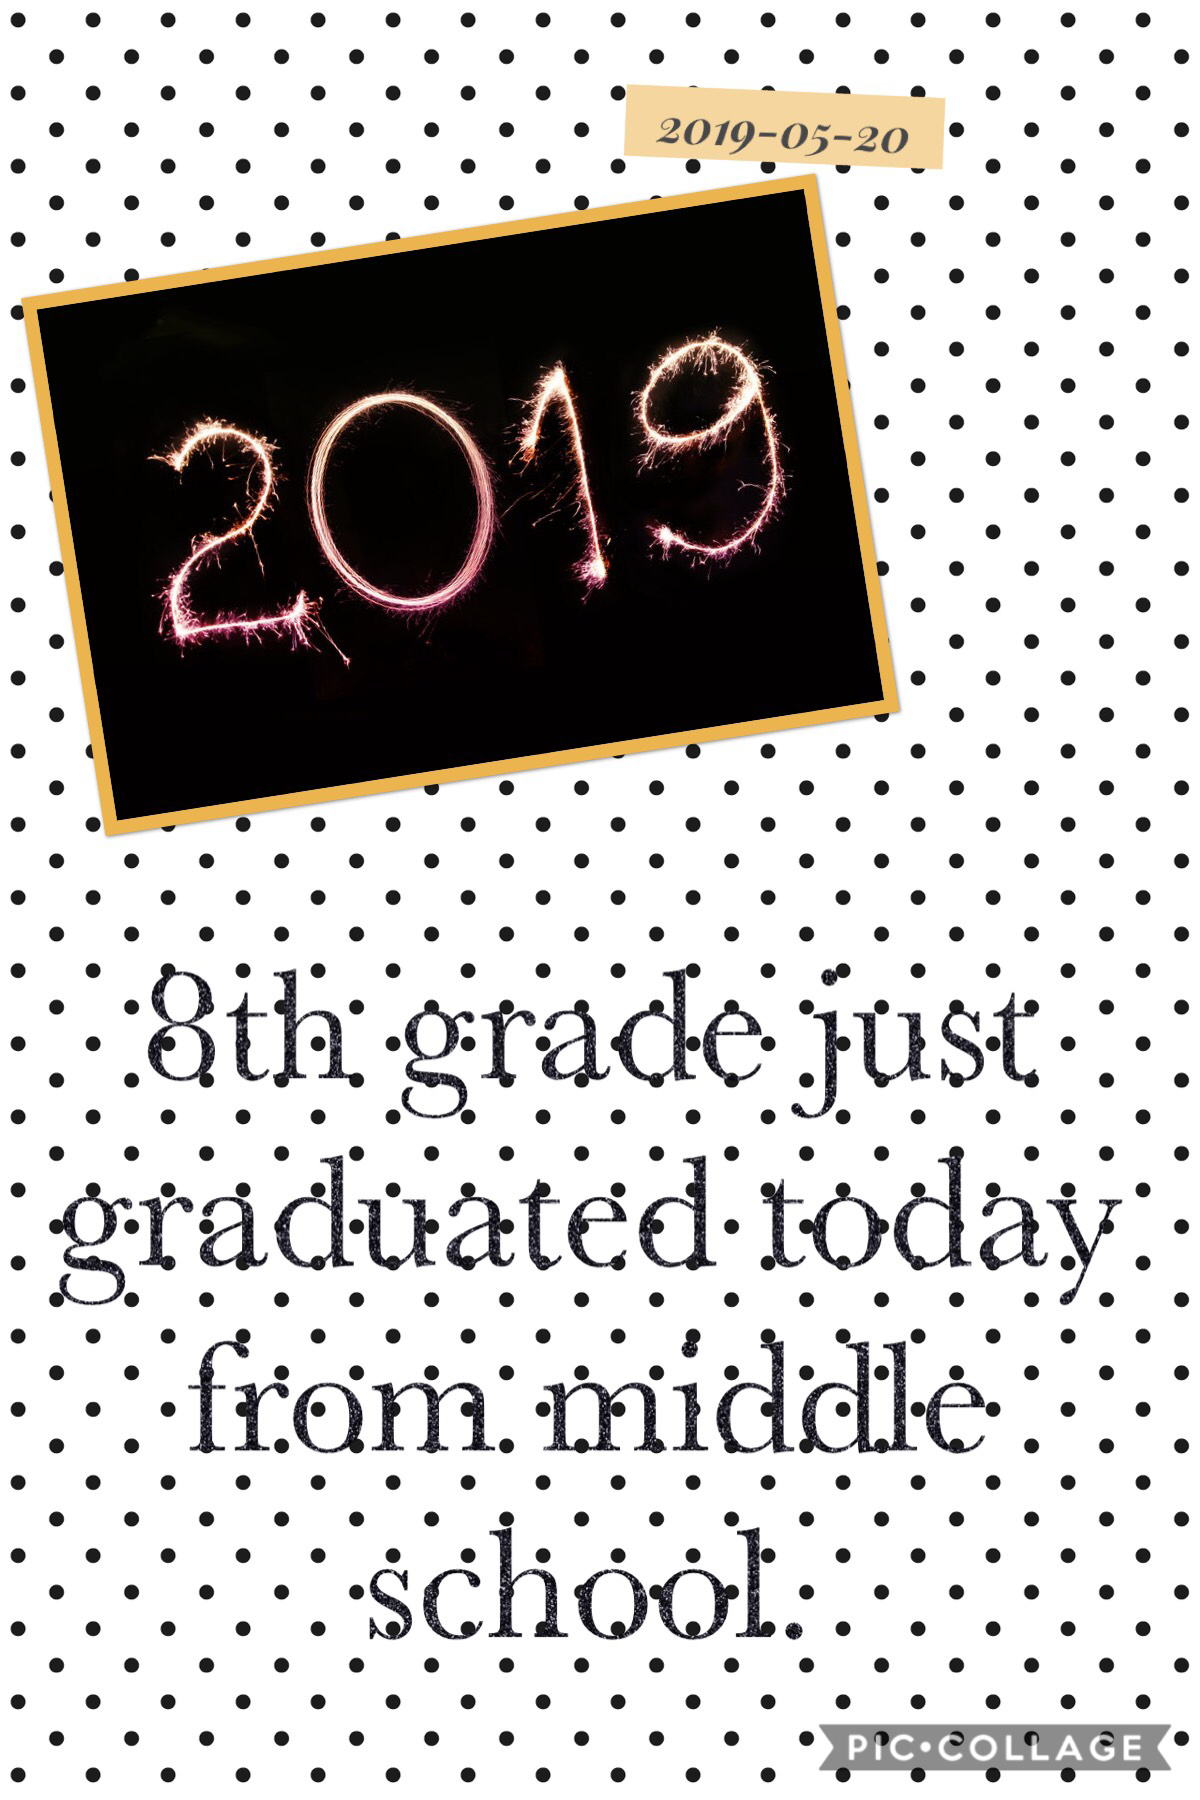 8th grade just graduated today and I am so sad because some of the 8th graders are my friends. I am in 6th grade. I will be going into 7th grade in August.